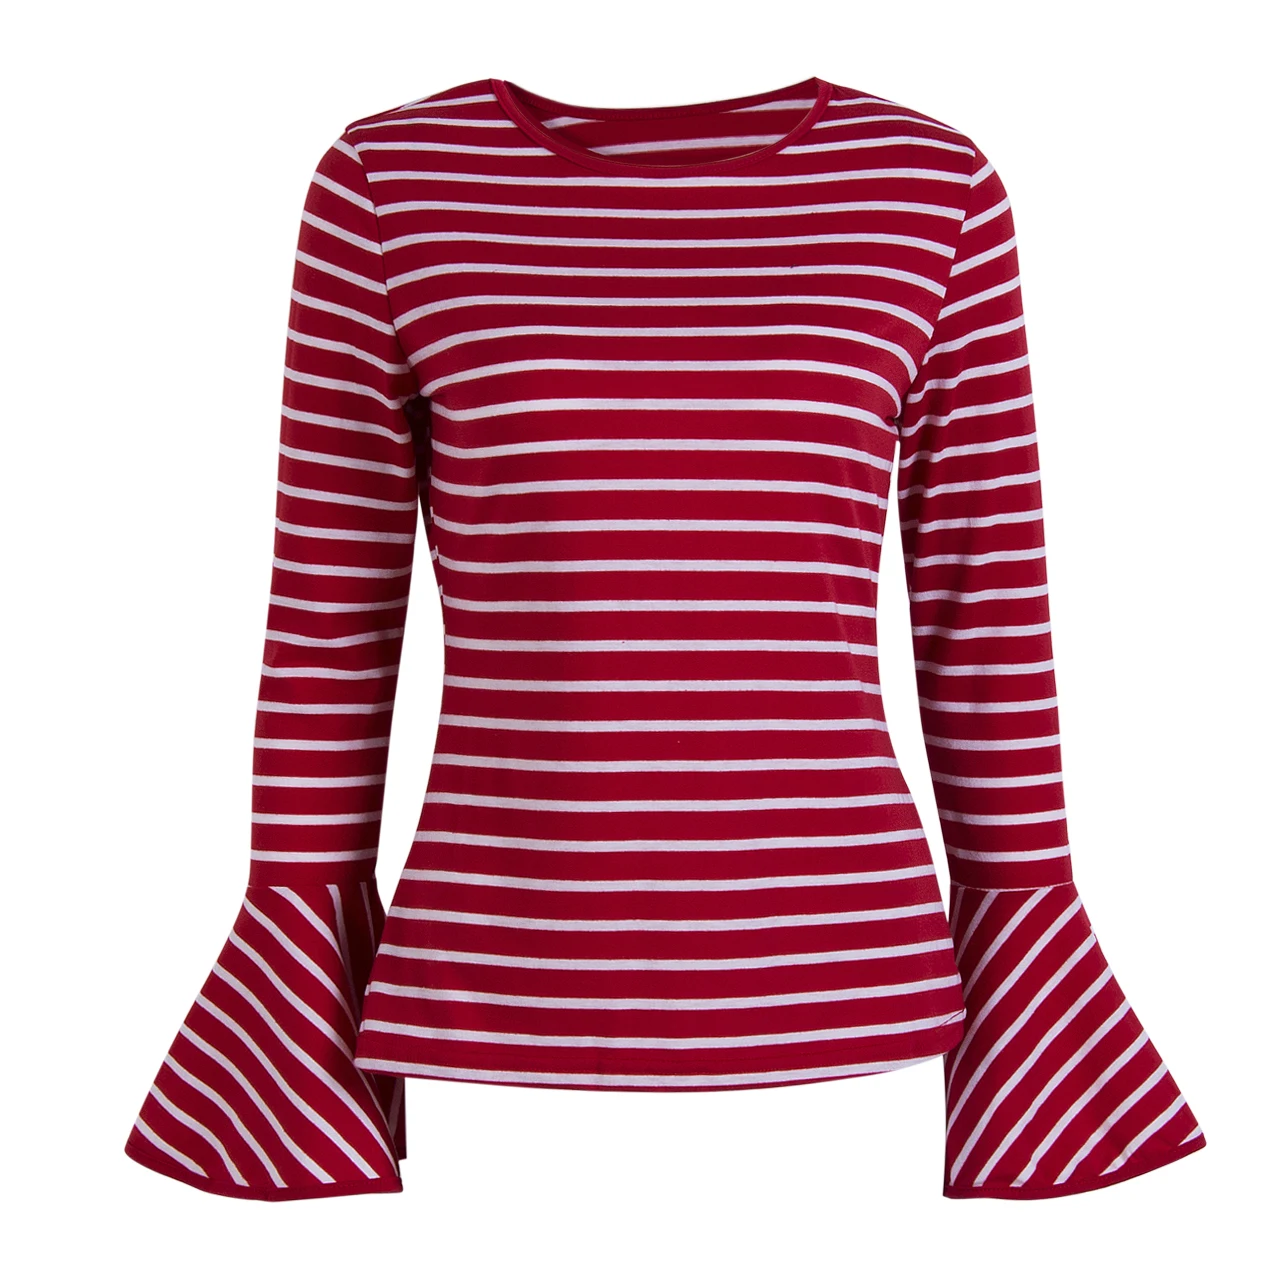 2017 Striped T Shirt Women Vintage White And Red Striped Shirt Cotton T